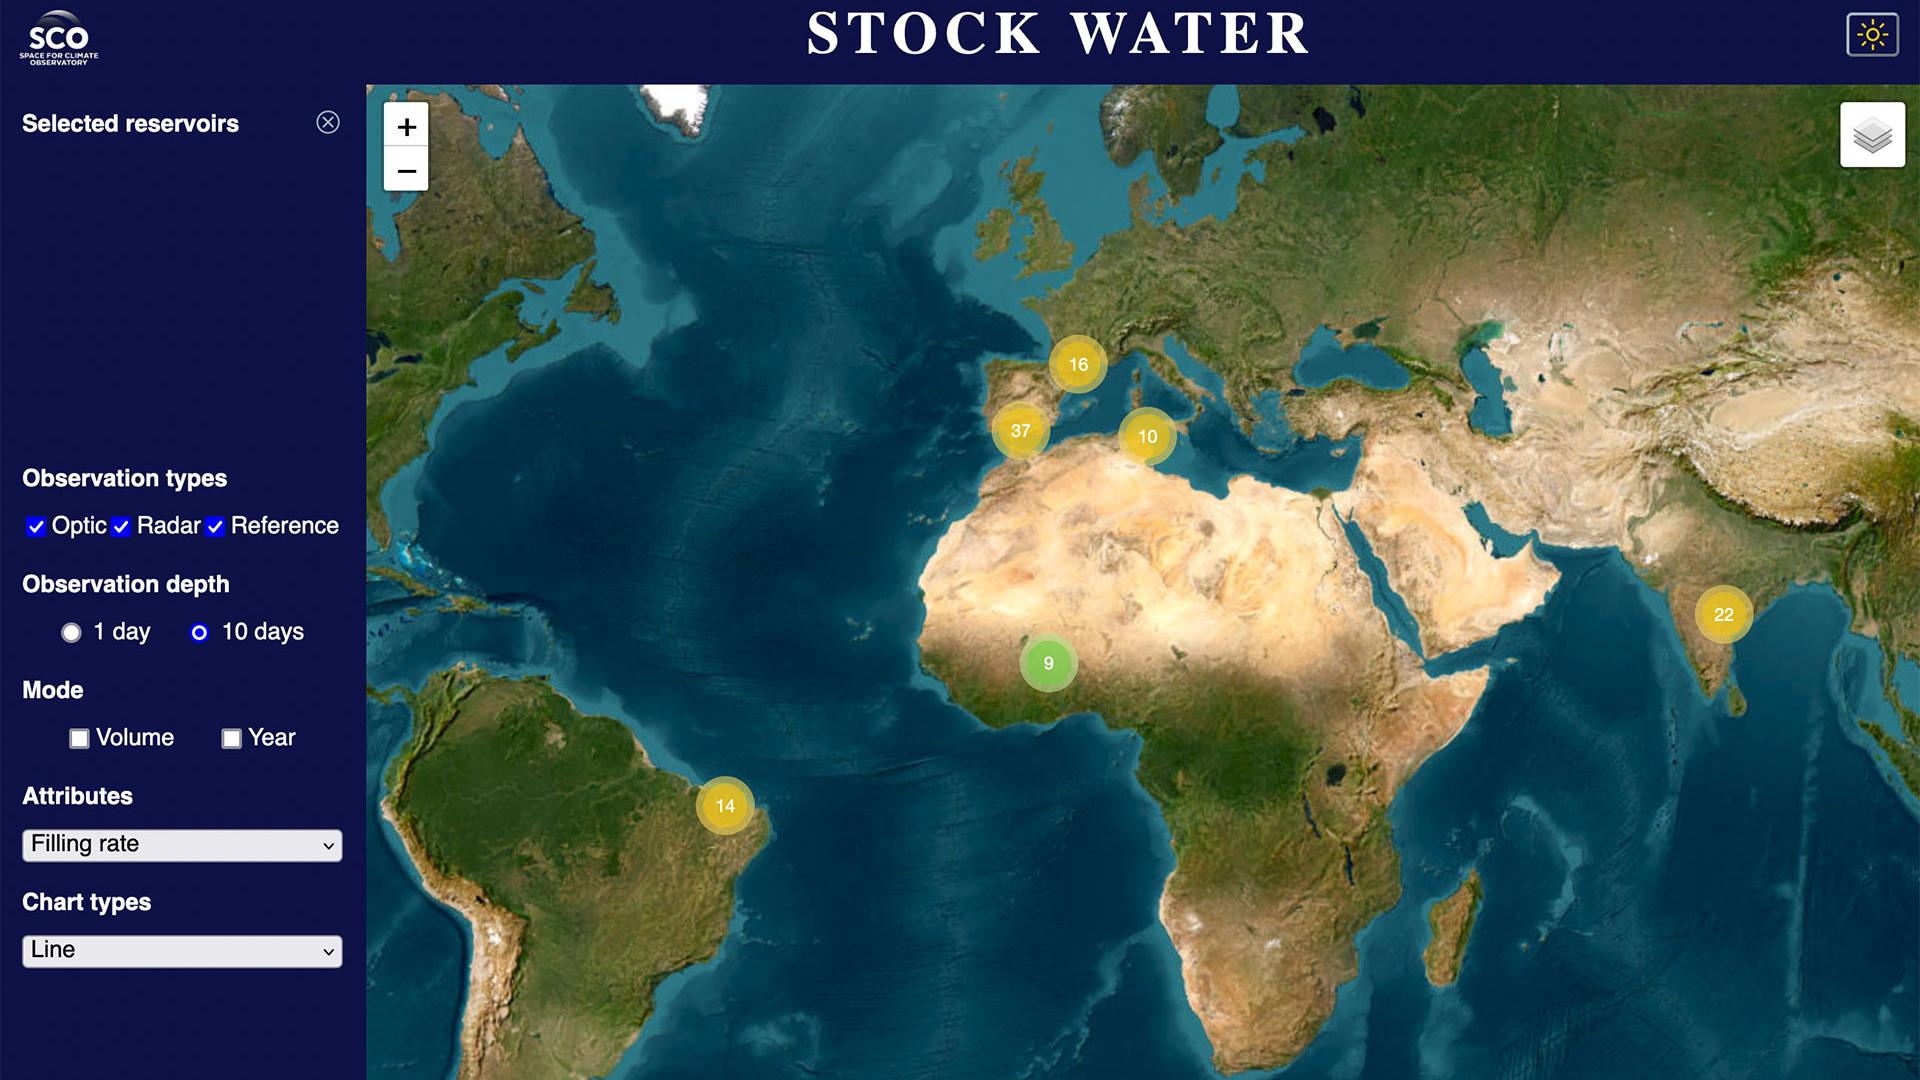 Based on Sentinel imagery, the StockWater demonstrator has been developed on a total of 108 dams.